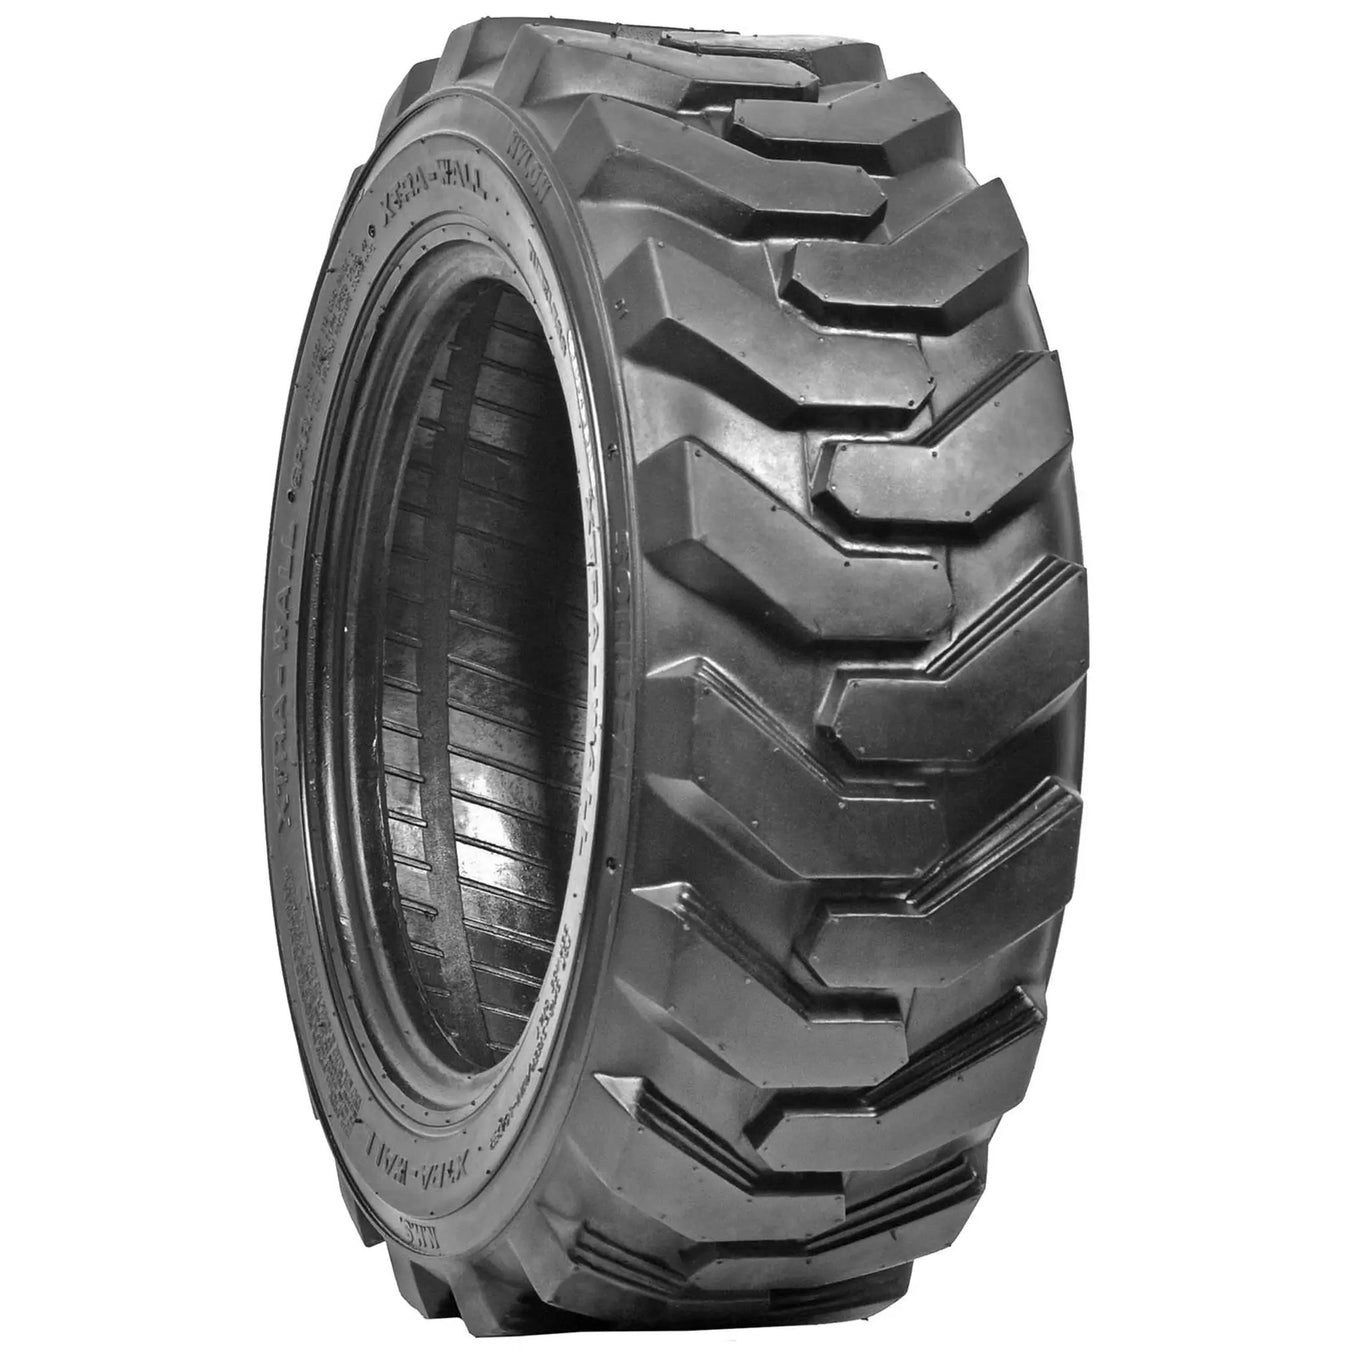 Skid Steer Tires - Pneumatic Tire Size - 27/8.5-15